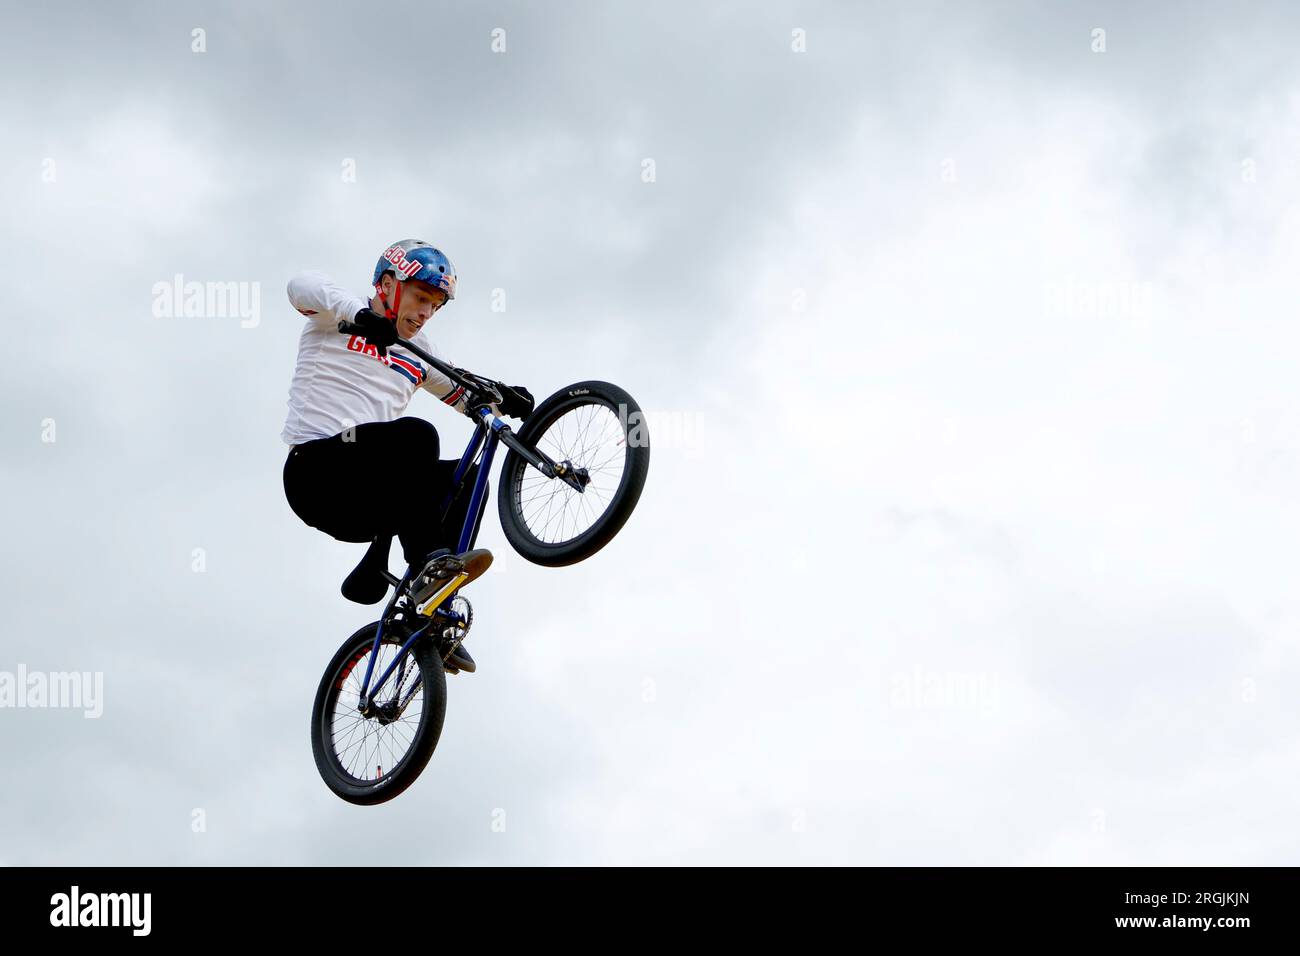 BMX Freestyle World Championships 2023 preview: Full schedule and how to  watch